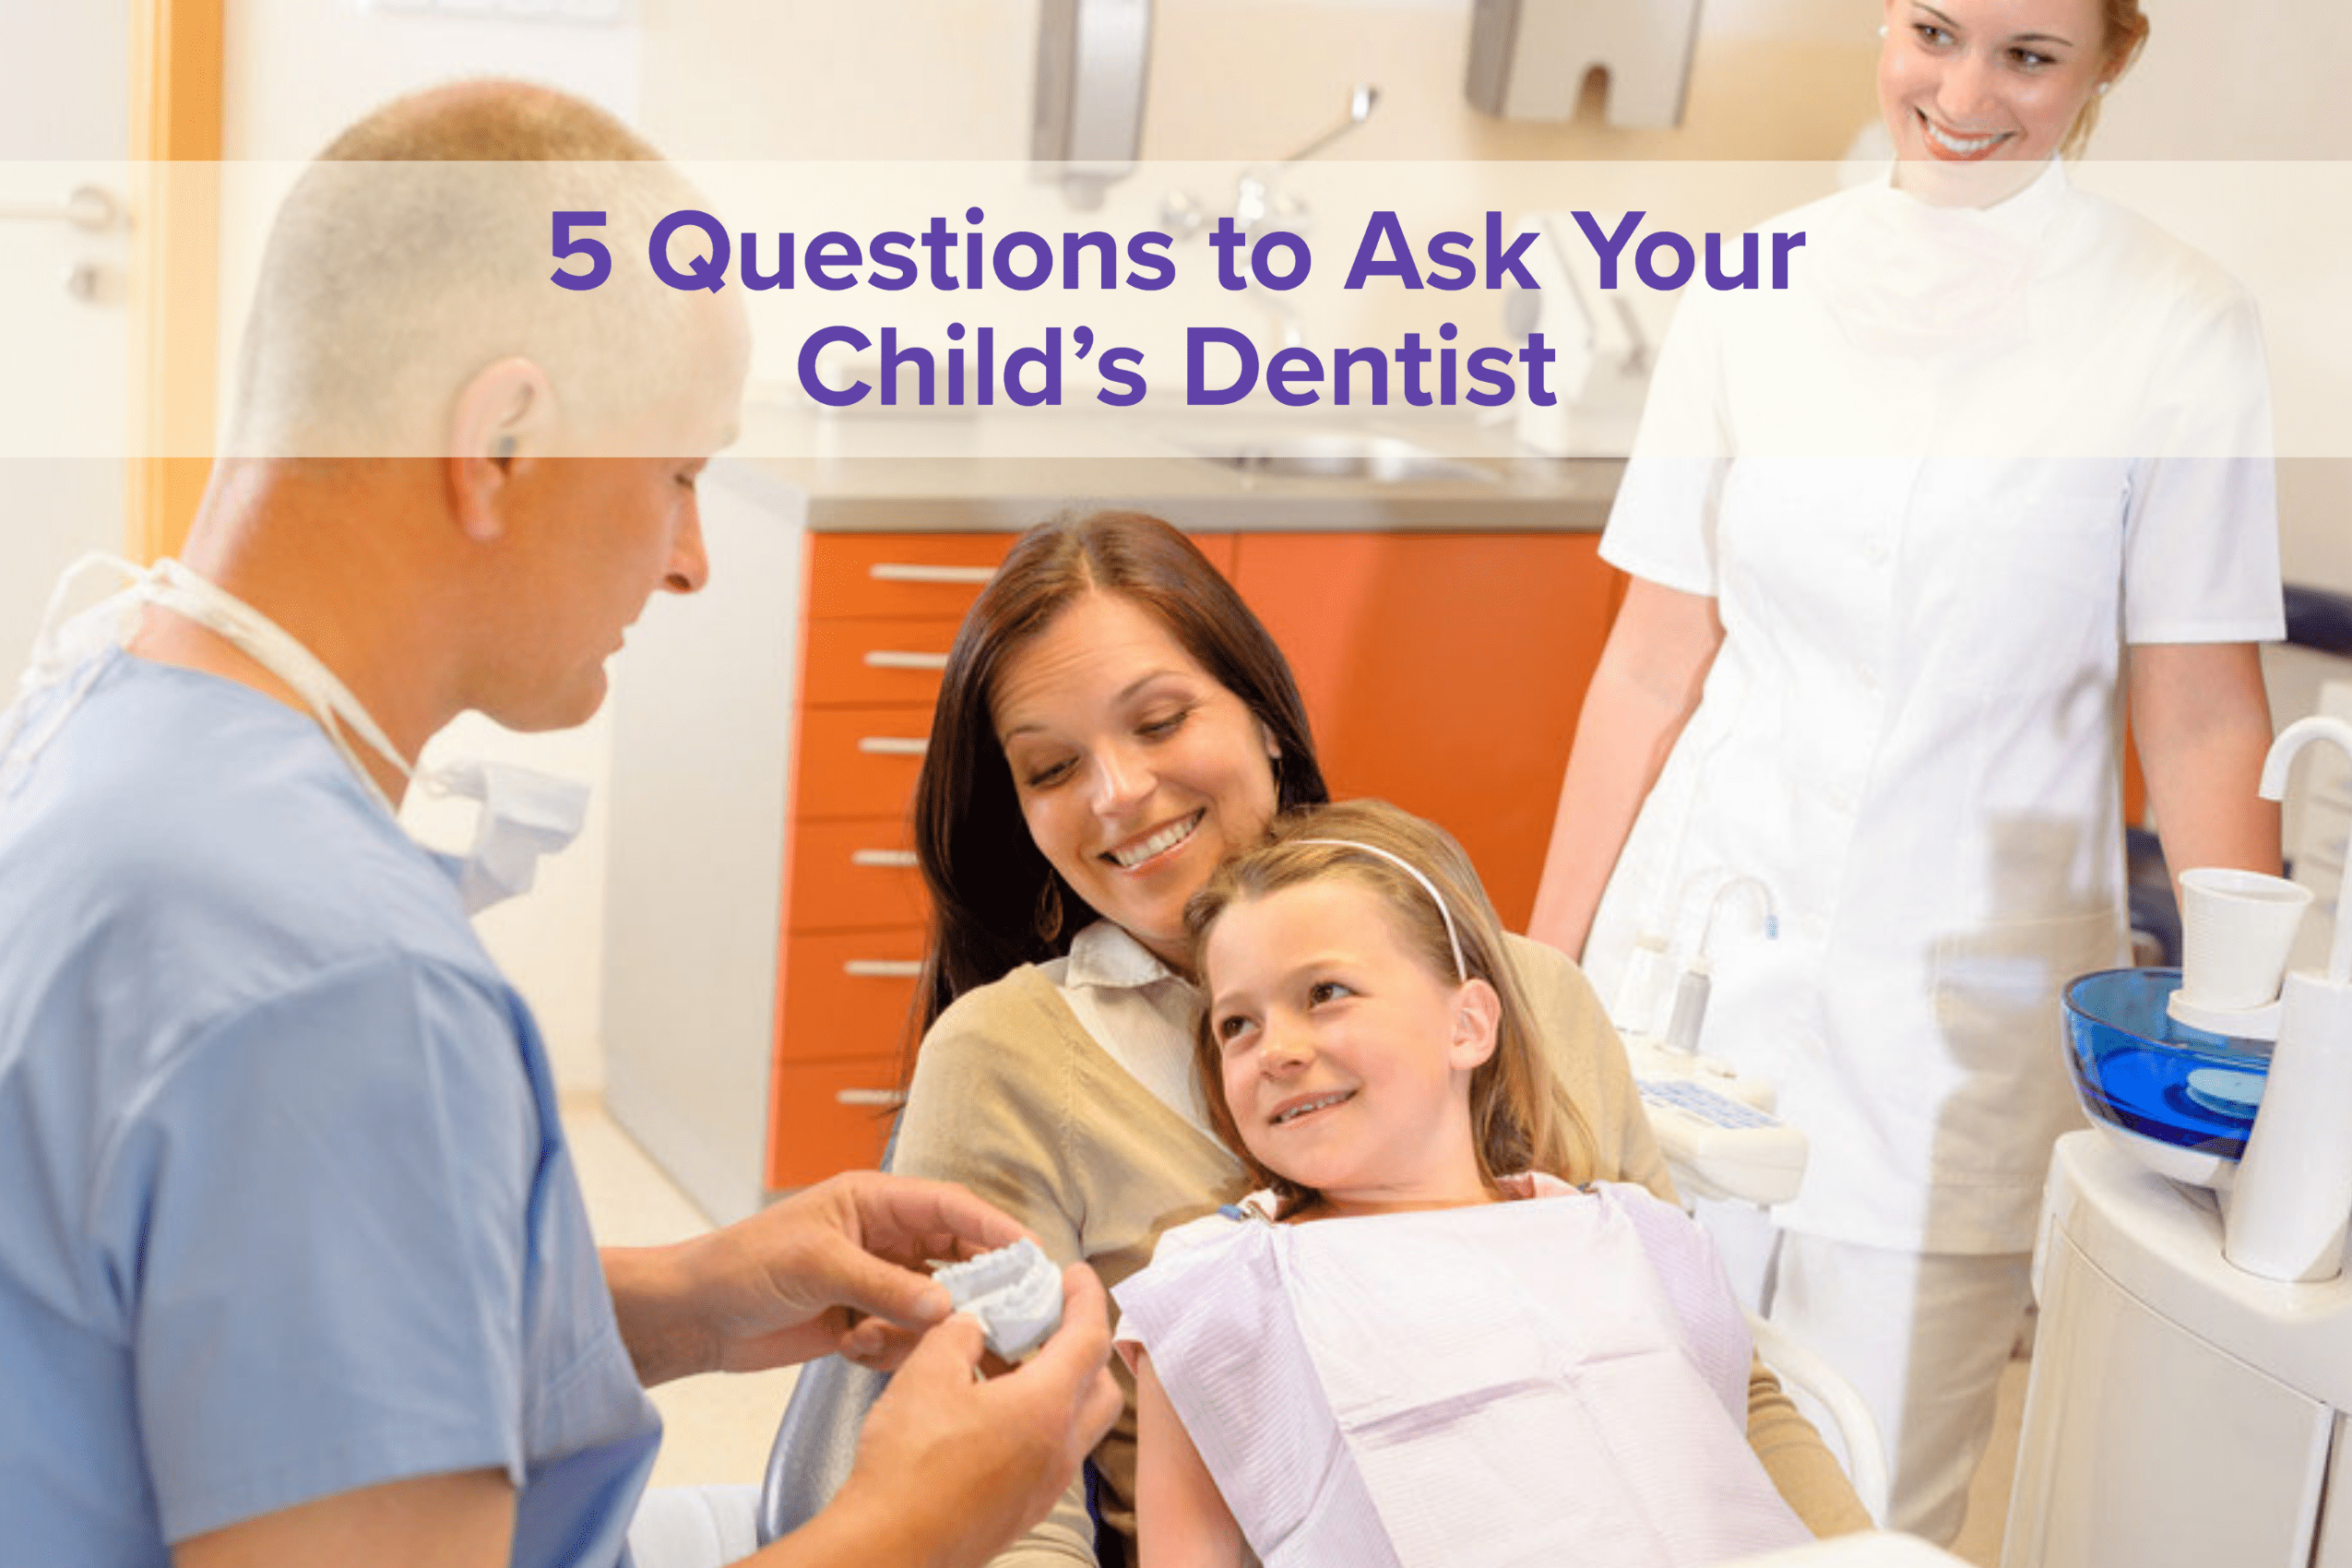 Questions to Ask Your Child's Dentist